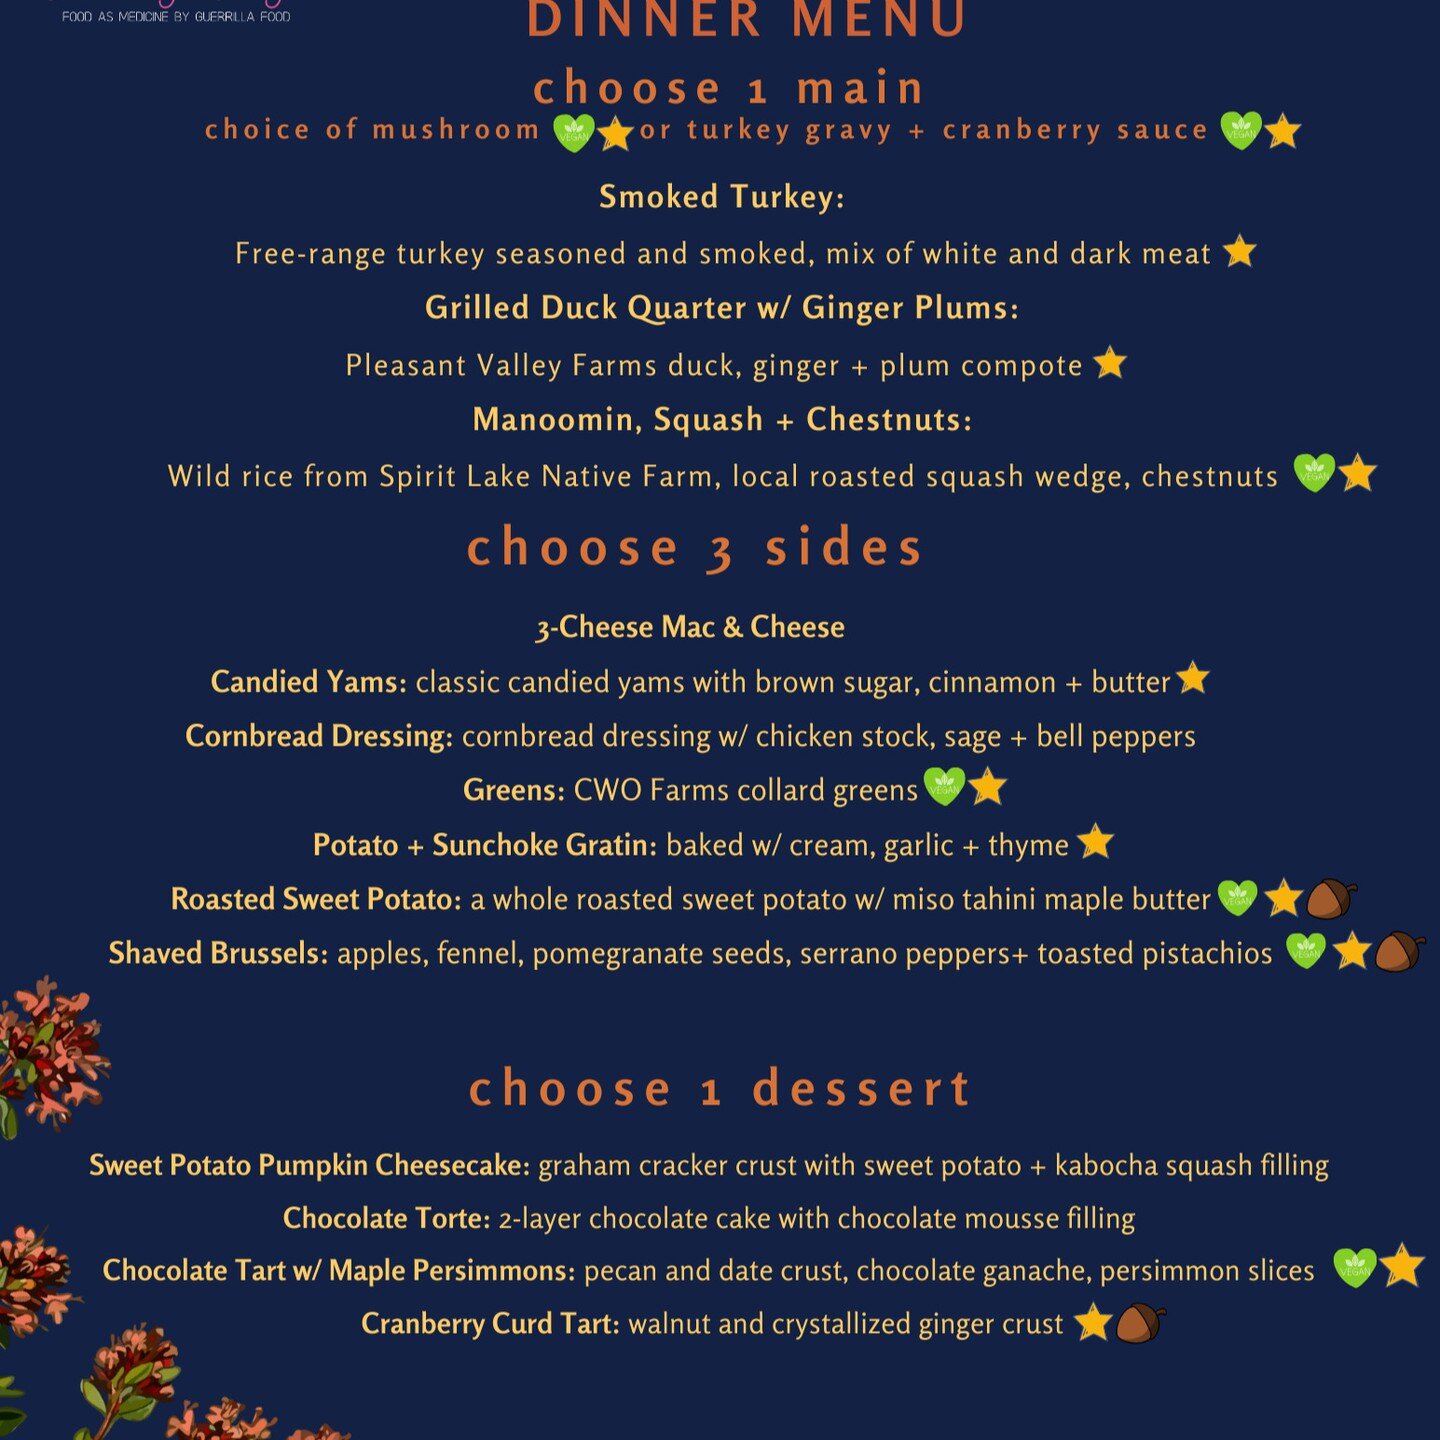 Orders close Monday, 11/20 for thanksgiving menu!
Pick-ups on Wednesday, 11/22 4-7pm.

single sides and family-size sides and desserts are also available for sale!